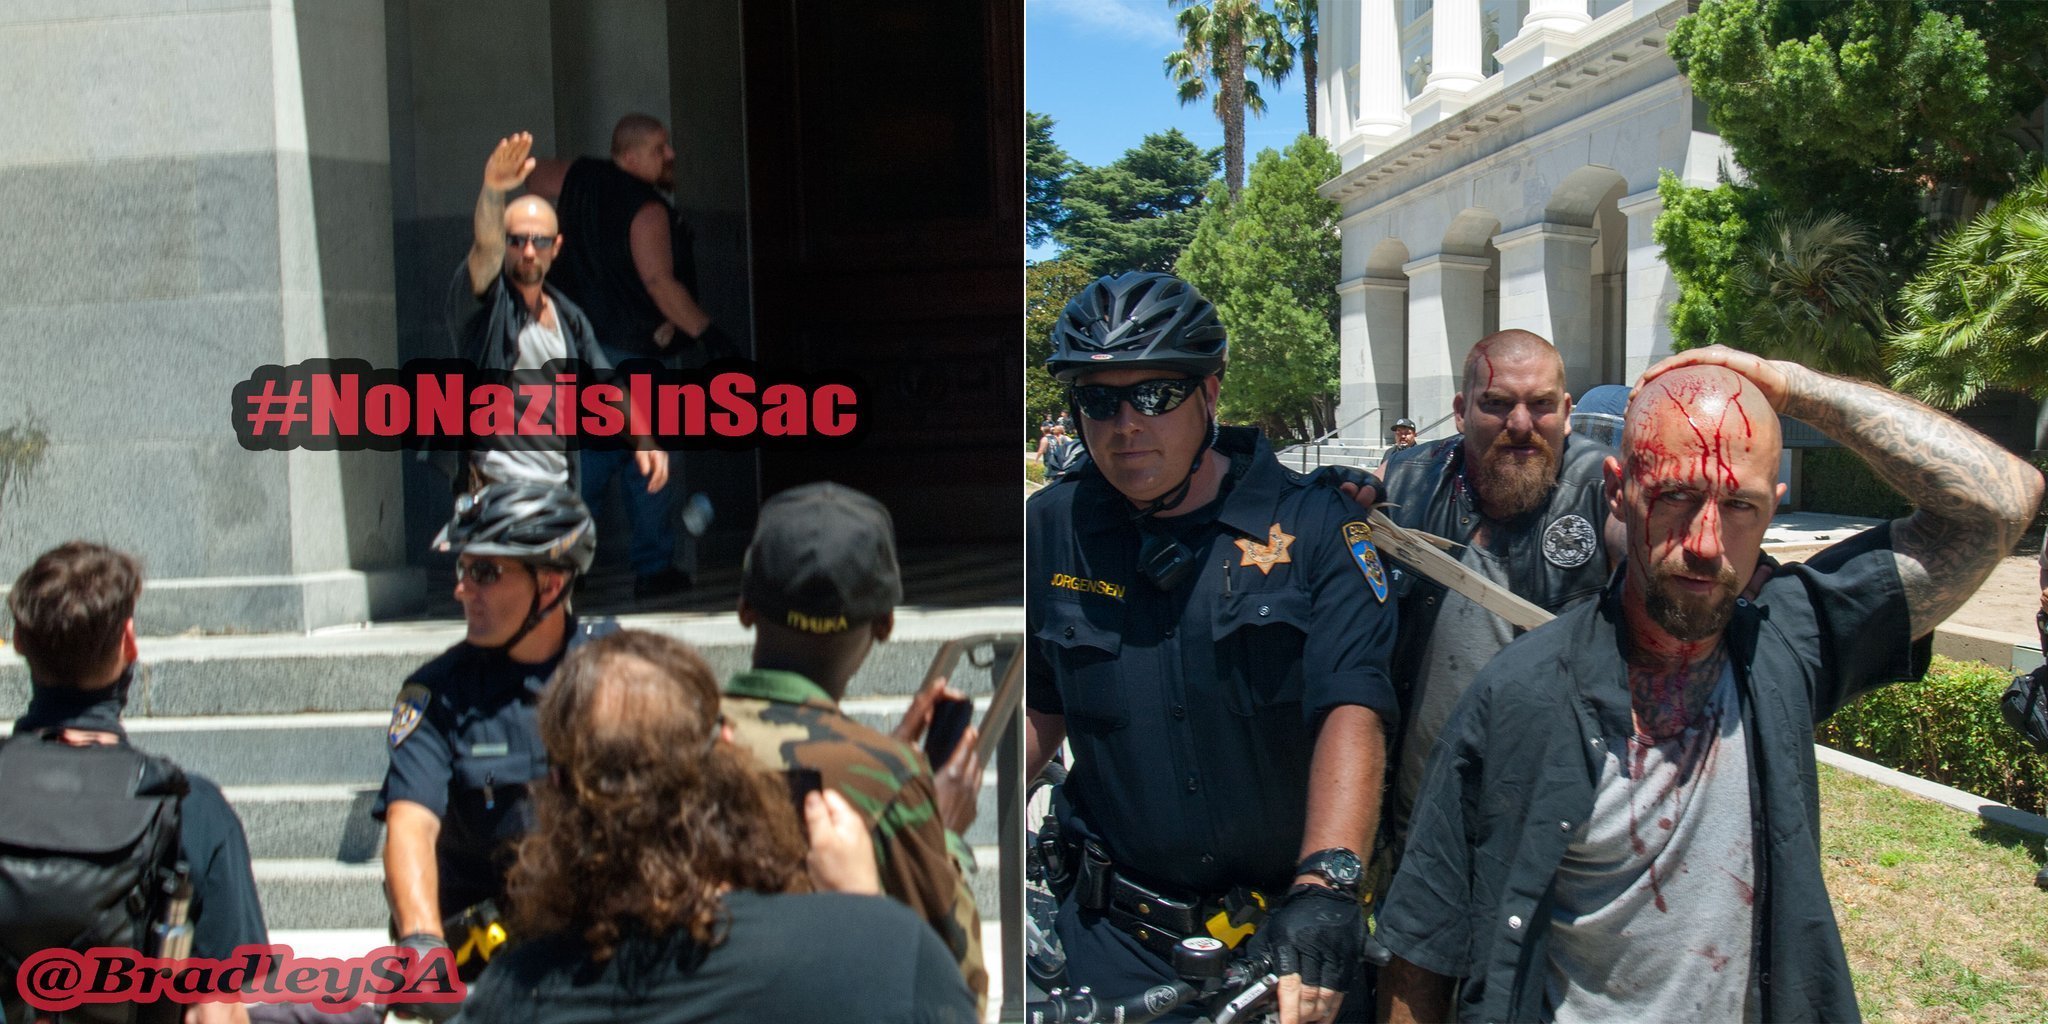 Jonathan Jordan, doing the Nazi salute on the Capitol steps on June 26, 2016, then Jordan soon after, bloodied and escorted off Capitol grounds by California Highway Patrol